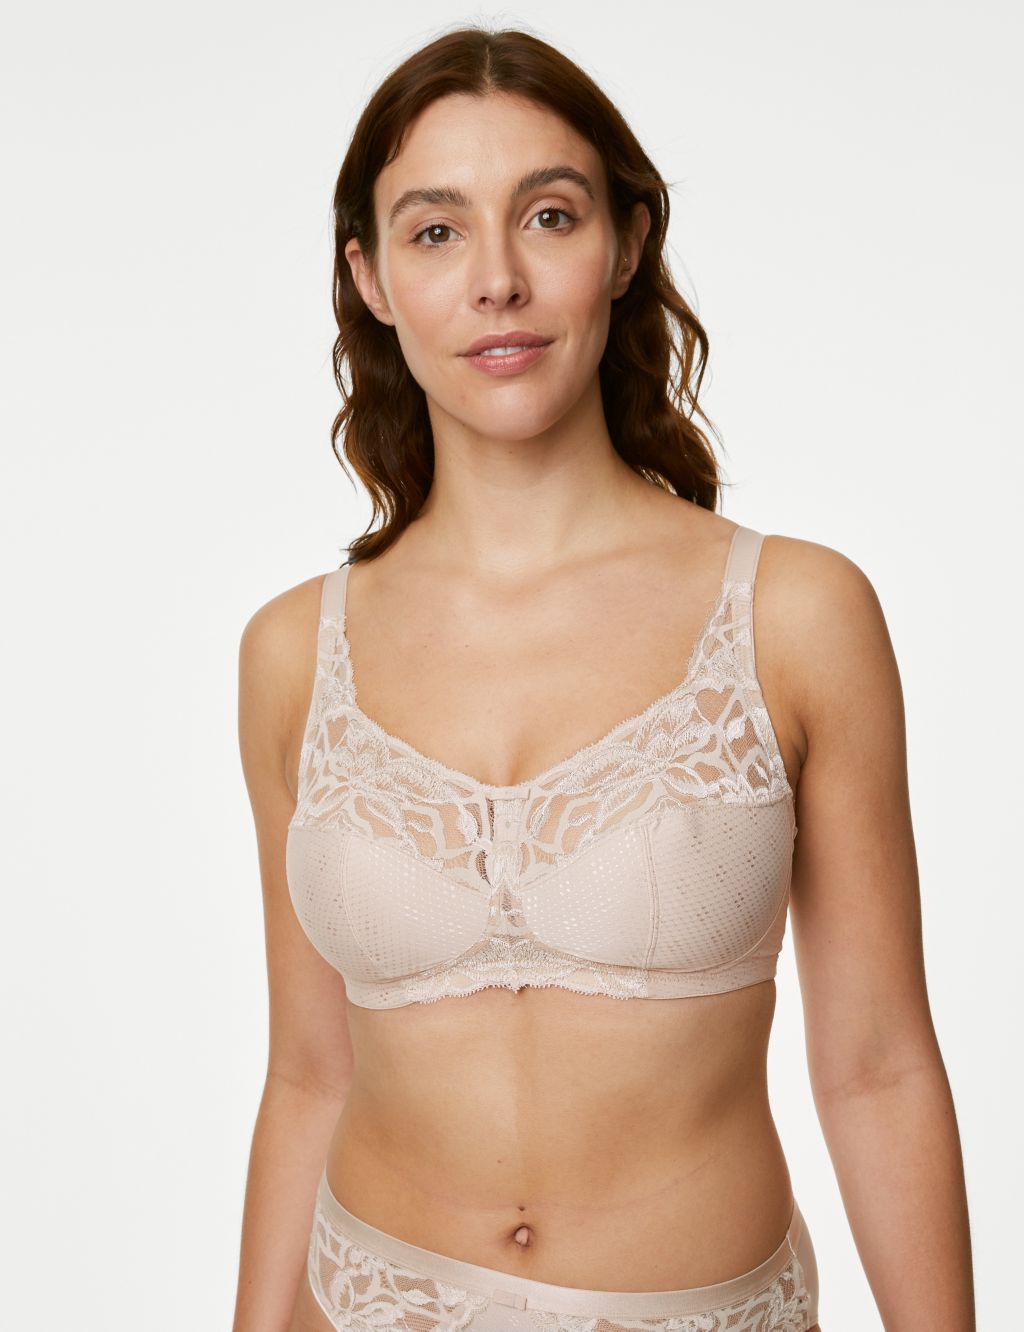 Total Support Wildblooms Non-Wired Bra B-H image 1